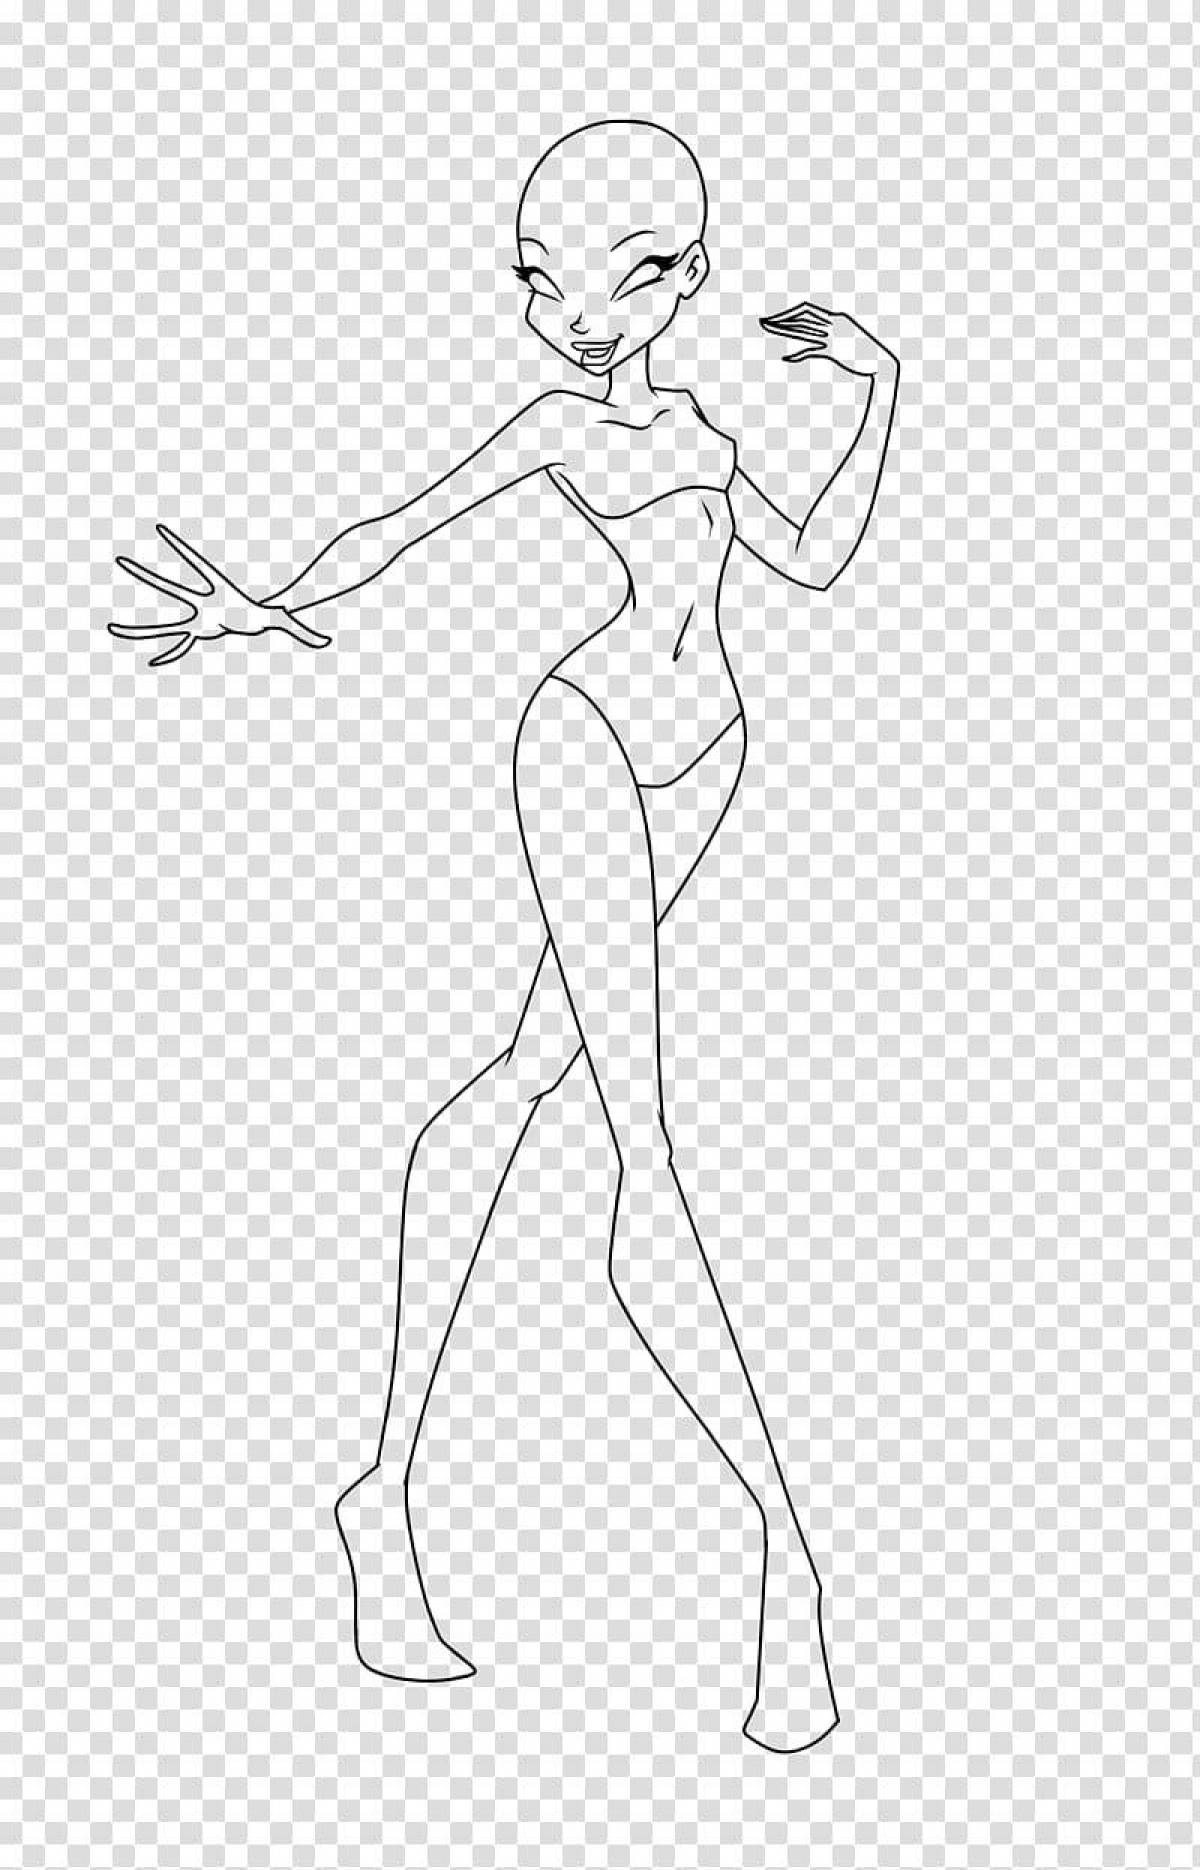 Coloring book brave mannequin